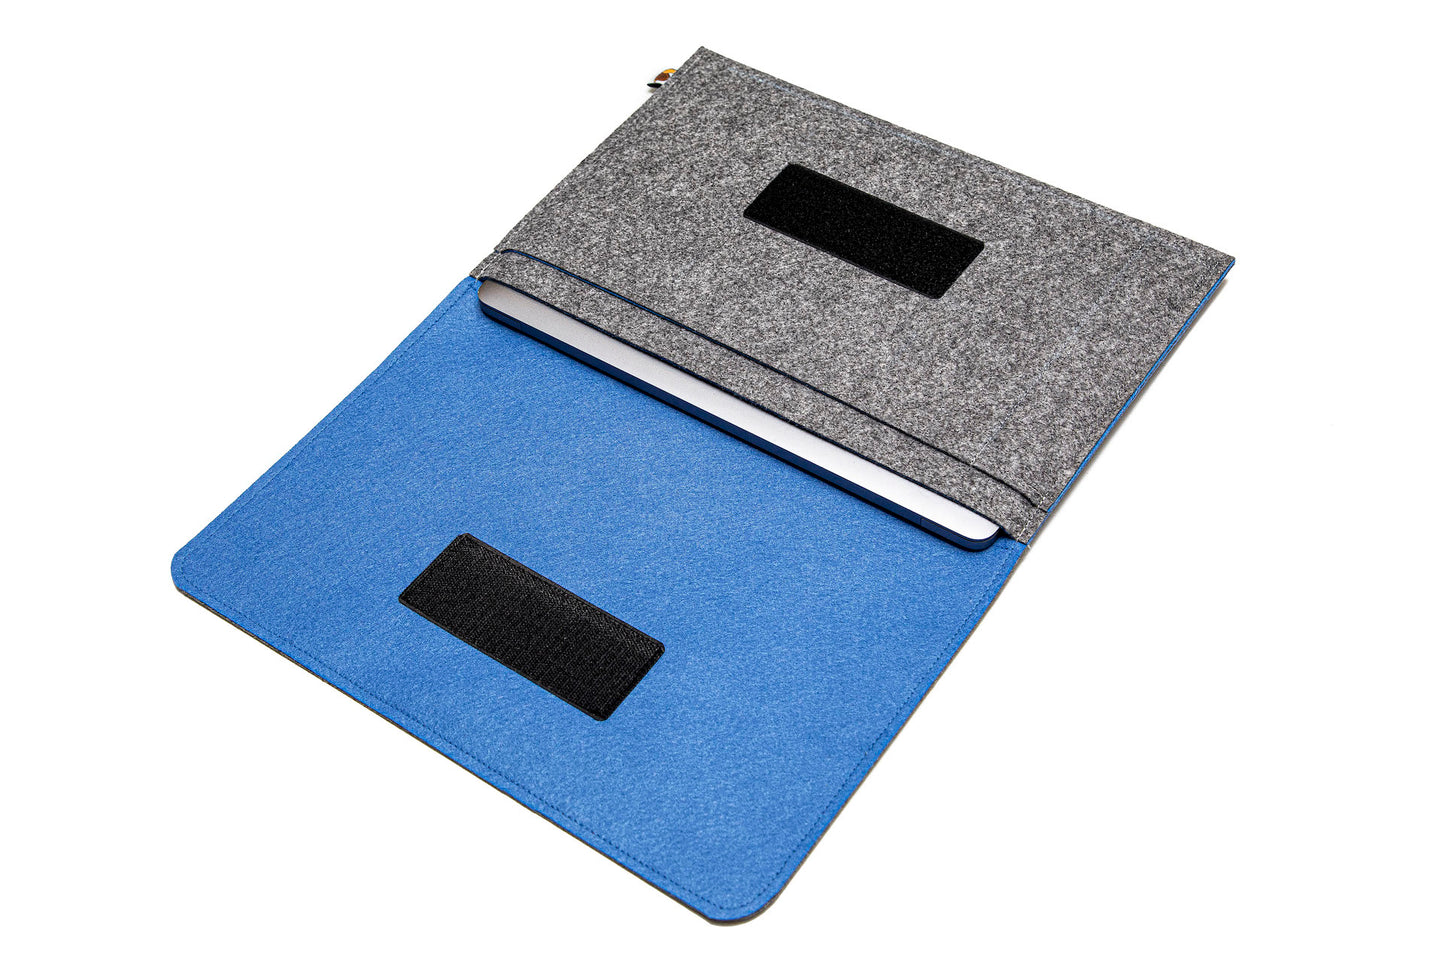 Handmade MacBook Cover with Accessories Pocket: Grey & Blue